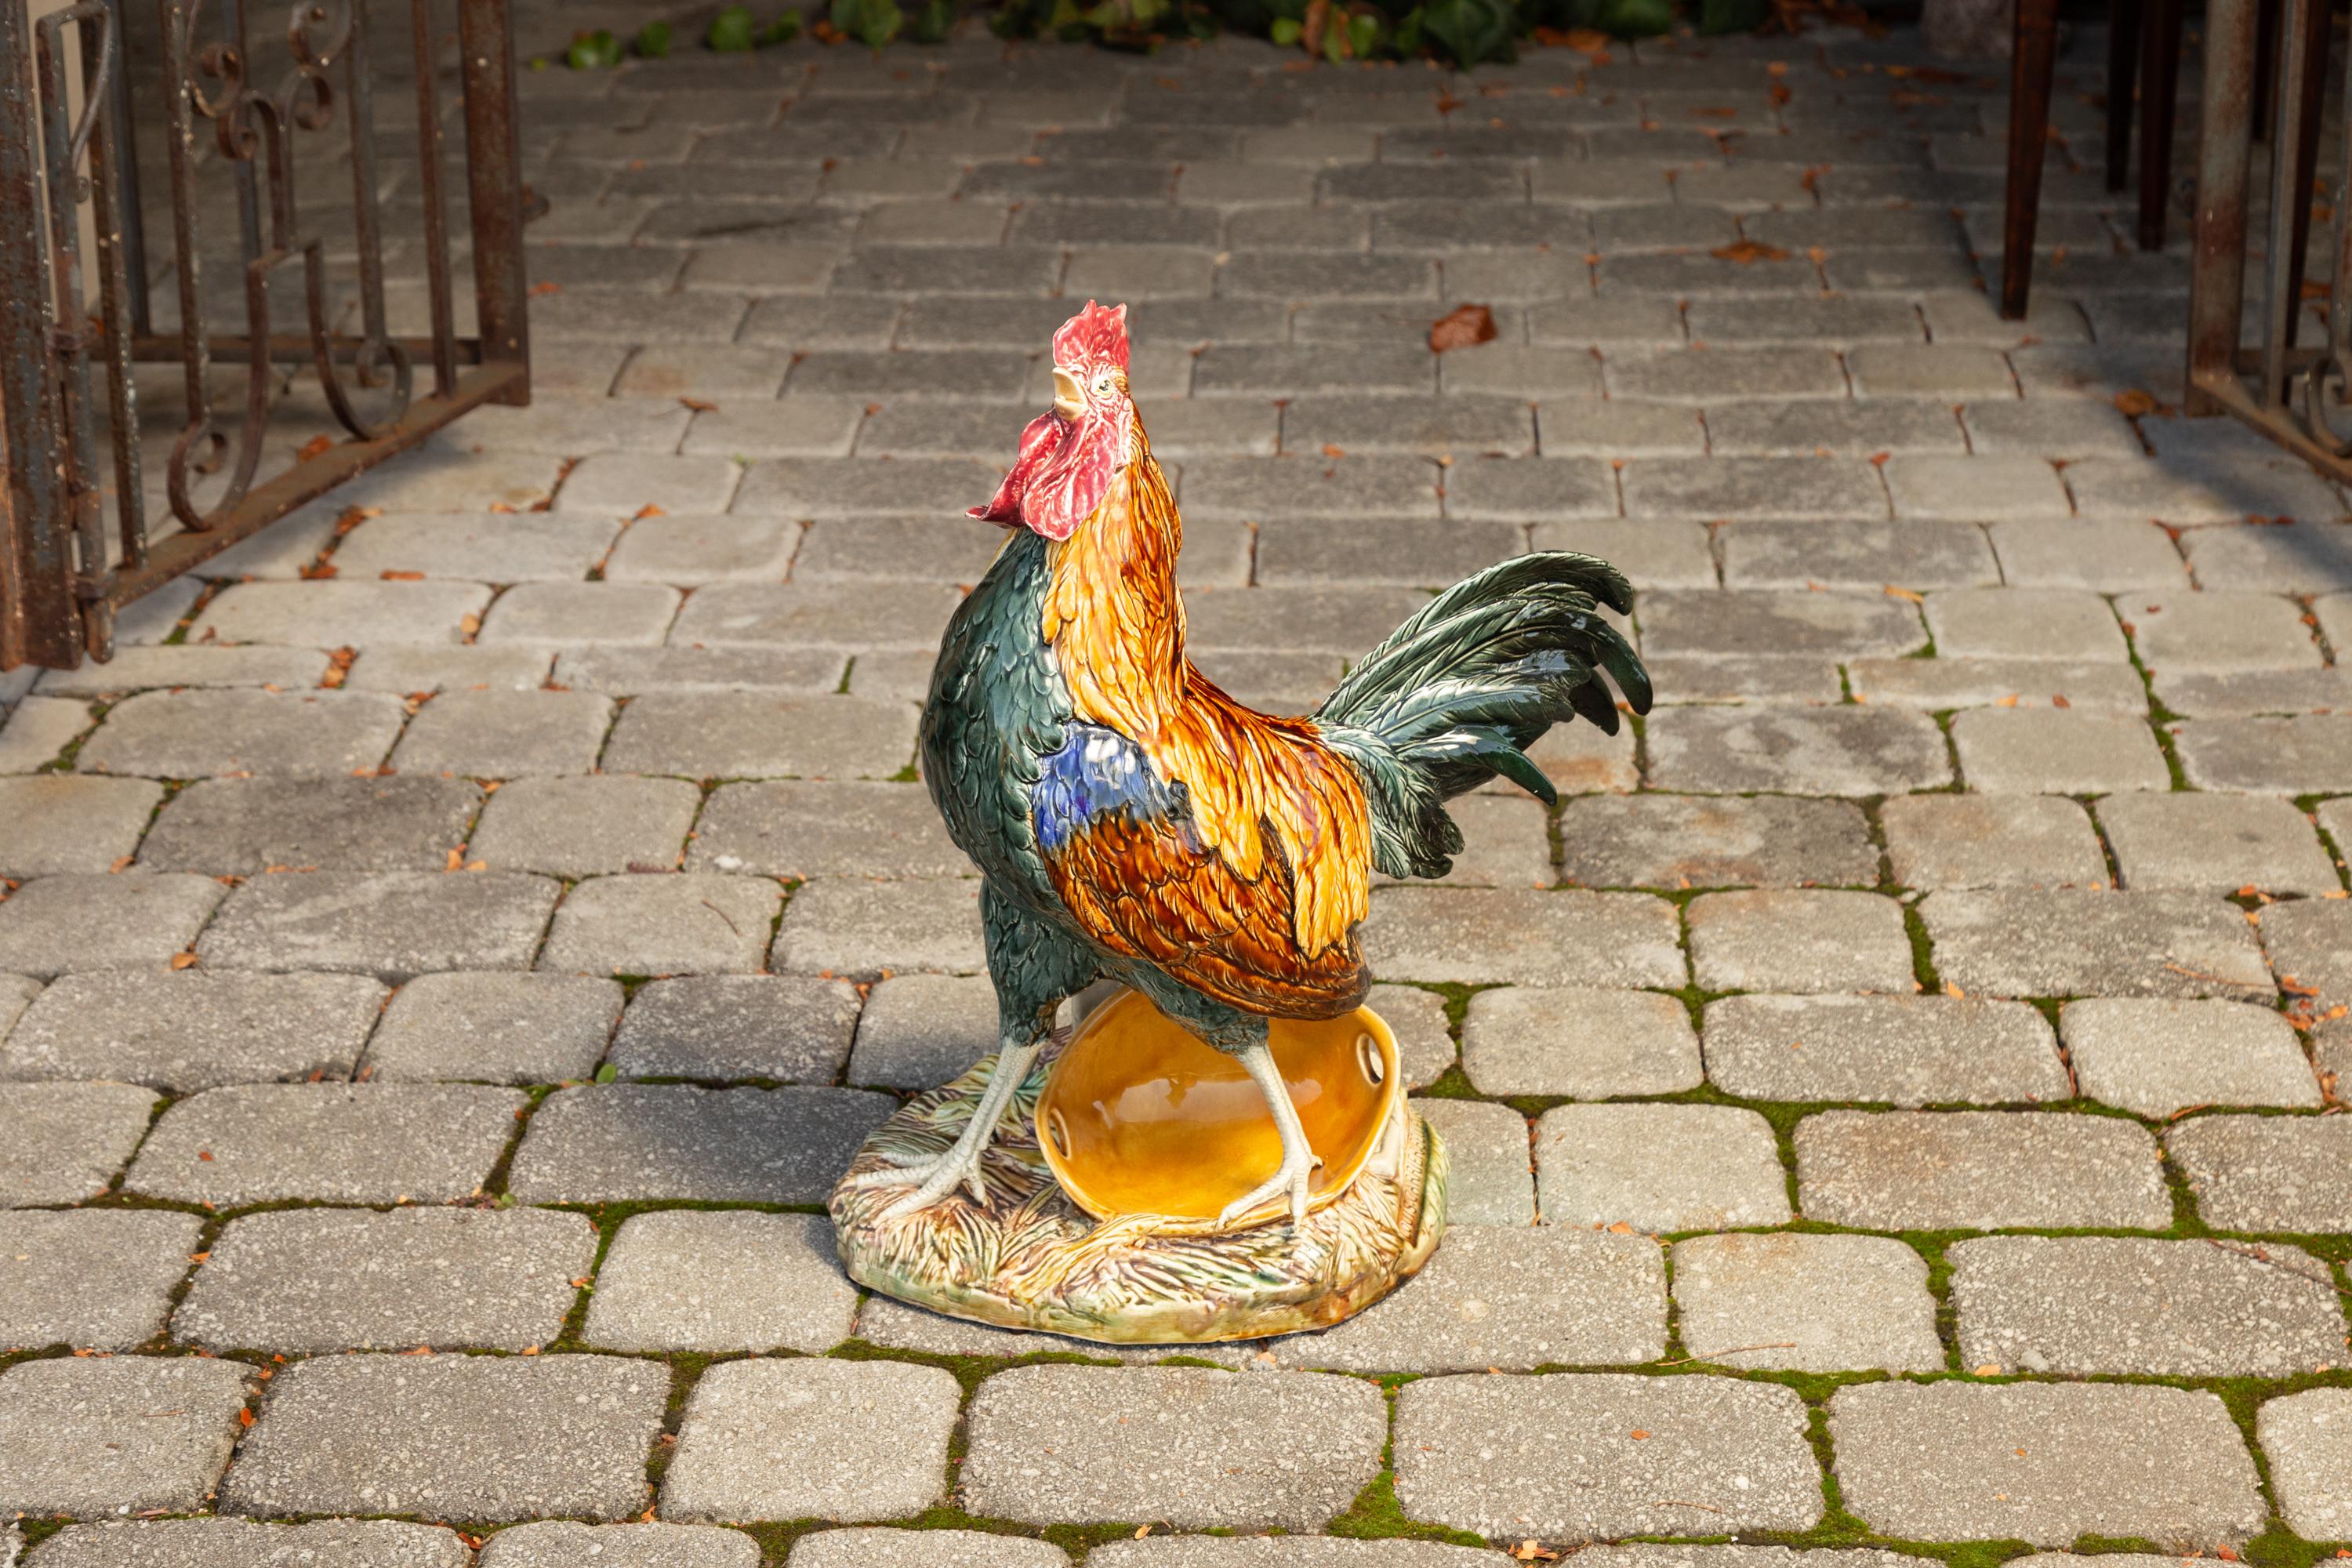 A French Choisy-le-Roi glazed majolica rooster from the late 19th century signed Louis-Robert Carrier-Belleuse. Born in France during the later years of the 19th century, this monumental rooster captures our attention with its exquisite polychromy